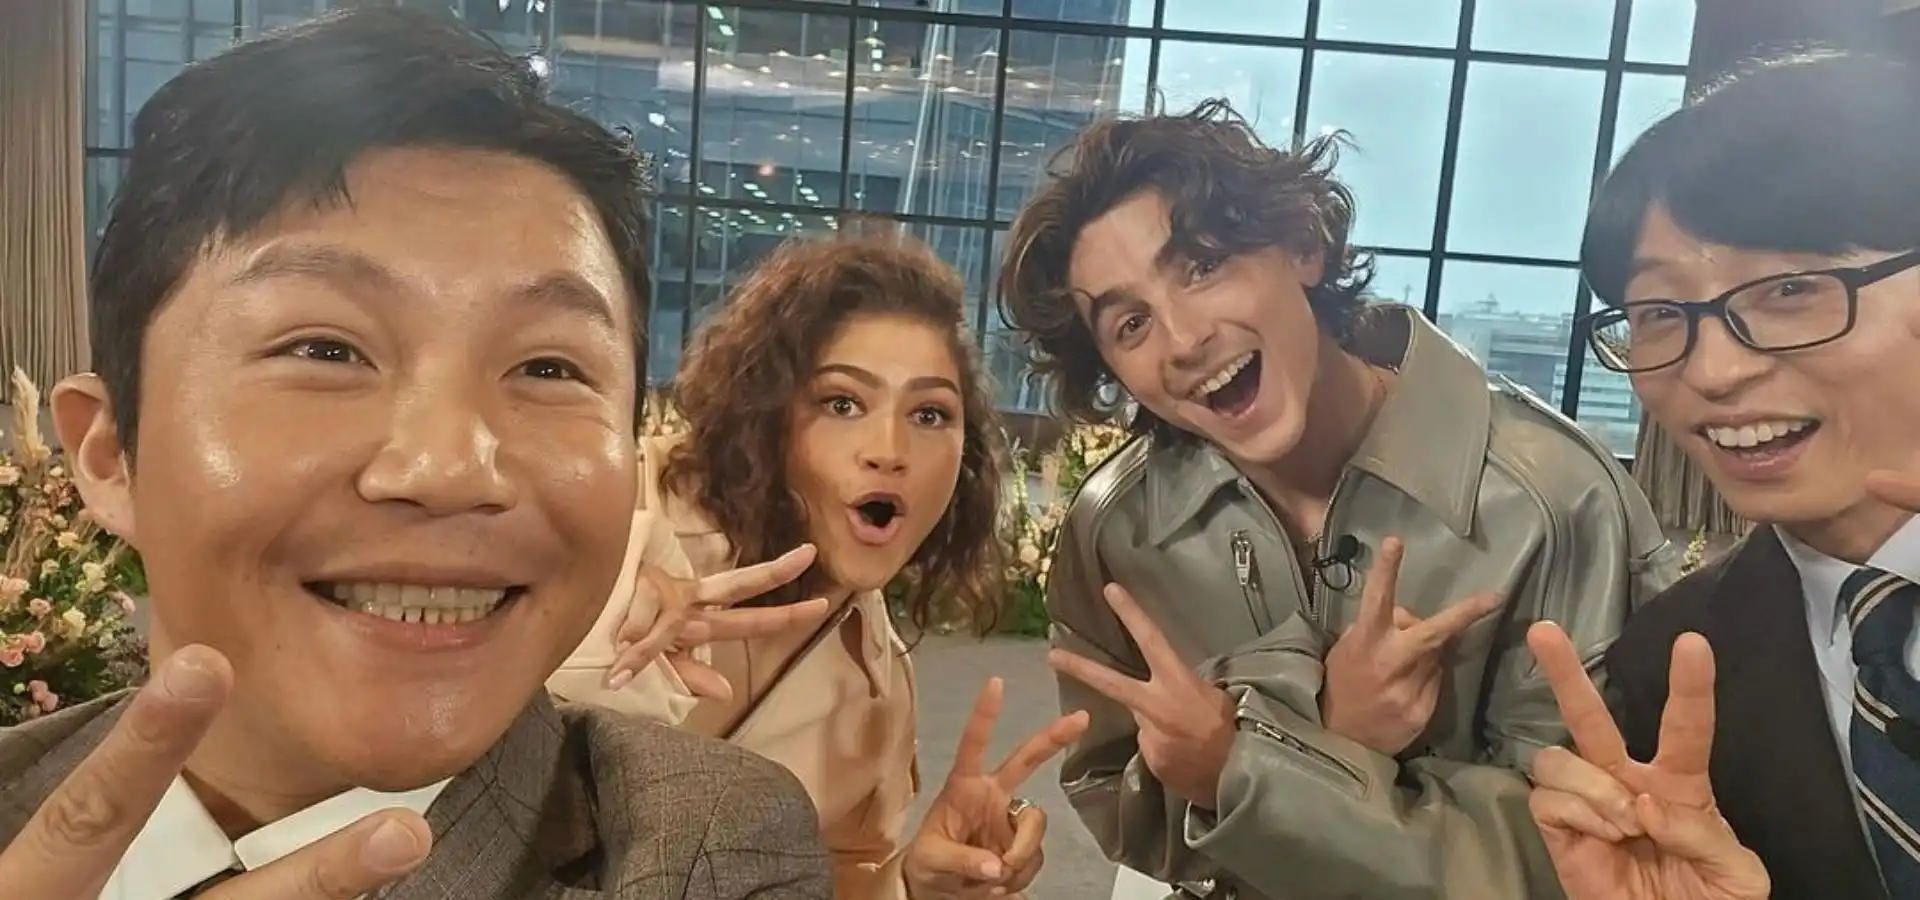 Fans react as Zendaya and Timothée Chalamet confirm appearance on Yoo Jae-suk's You Quiz on the Block for Dune: Part 2 promotions